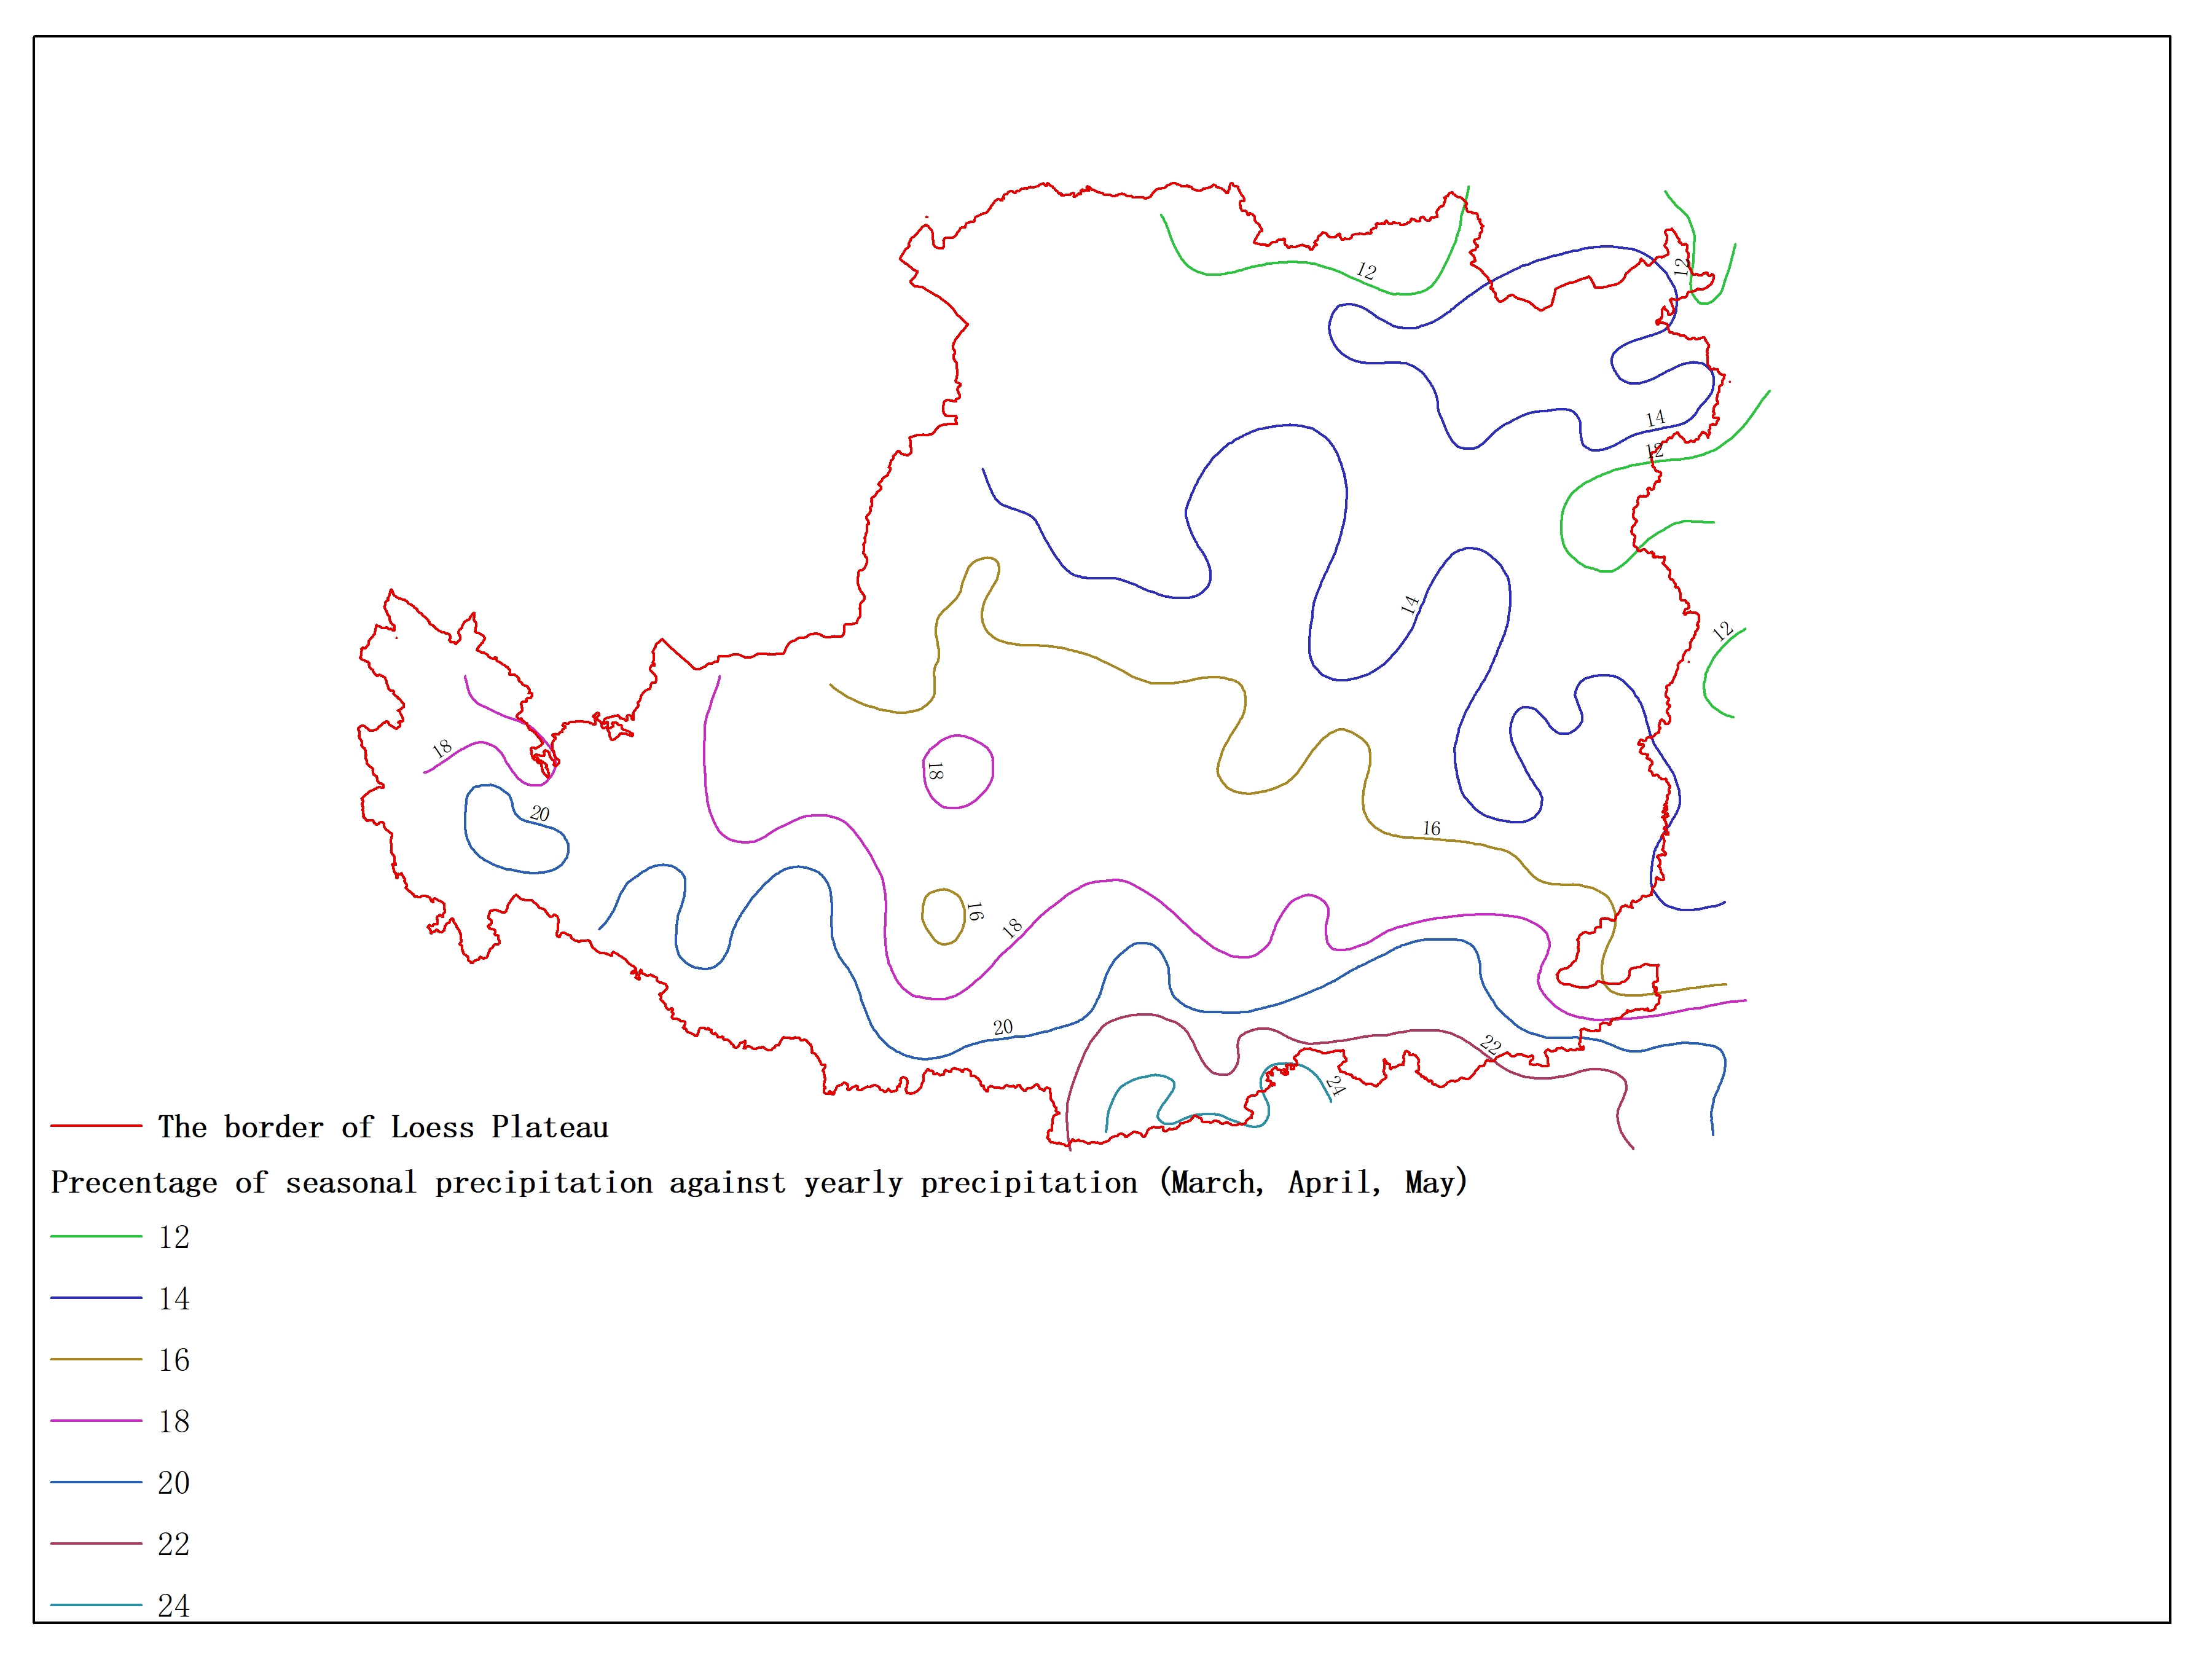 Agricultural climate resource atlas of Loess Plateau-Precentage of seasonal precipitation against yearly precipitation (March, April, May)